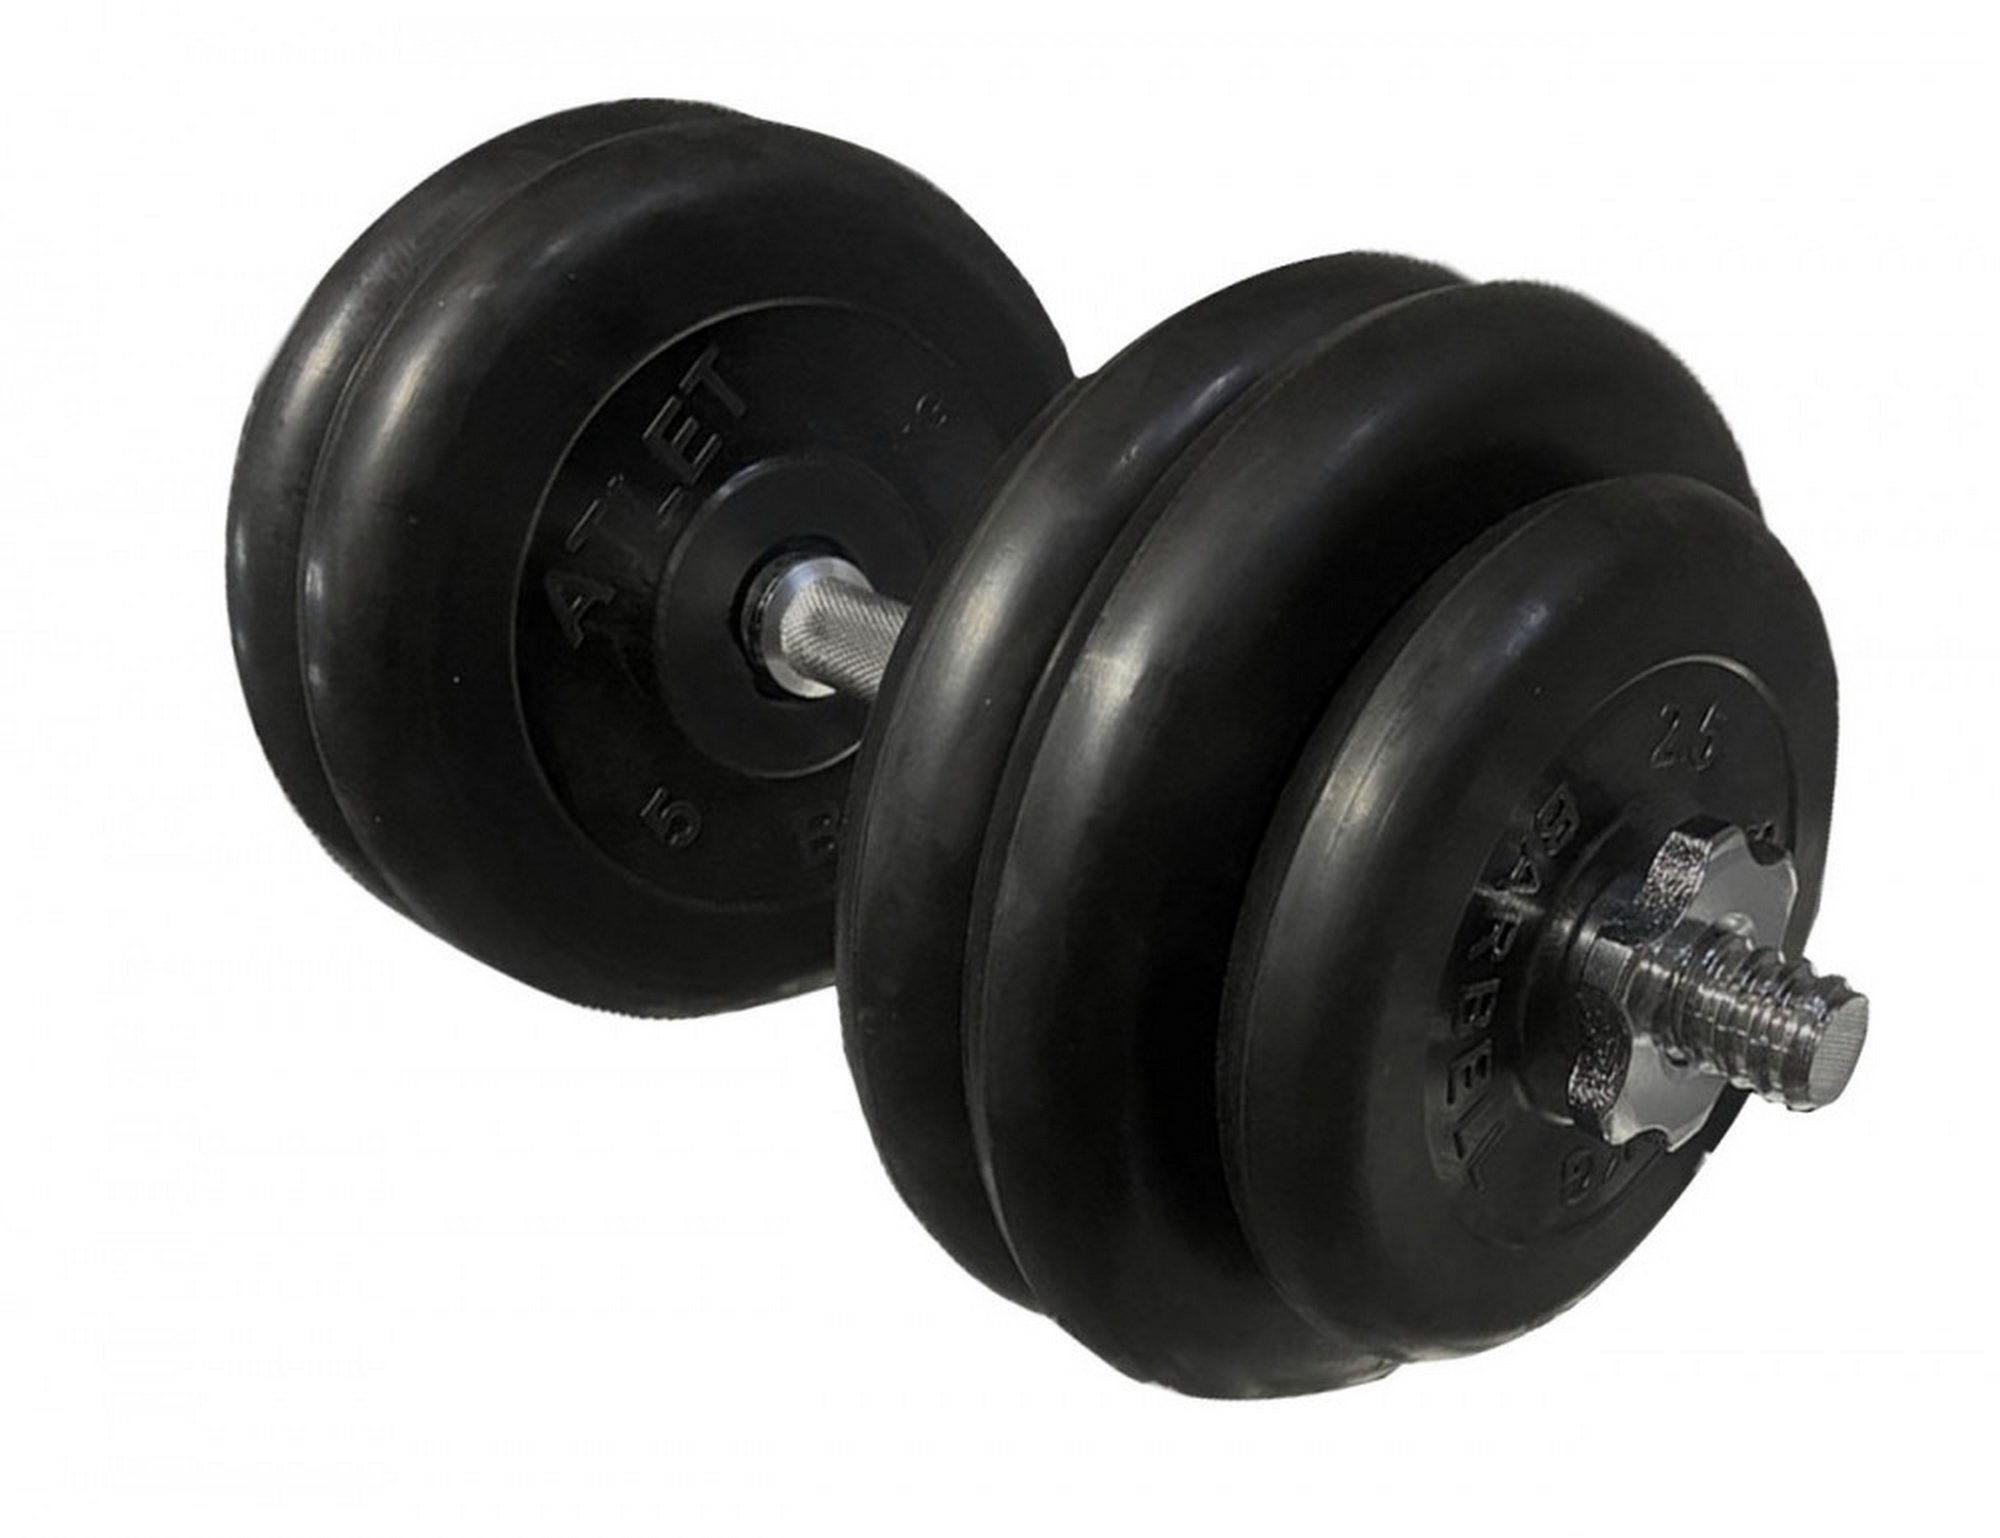   26, 5 MB Barbell  -26, 5